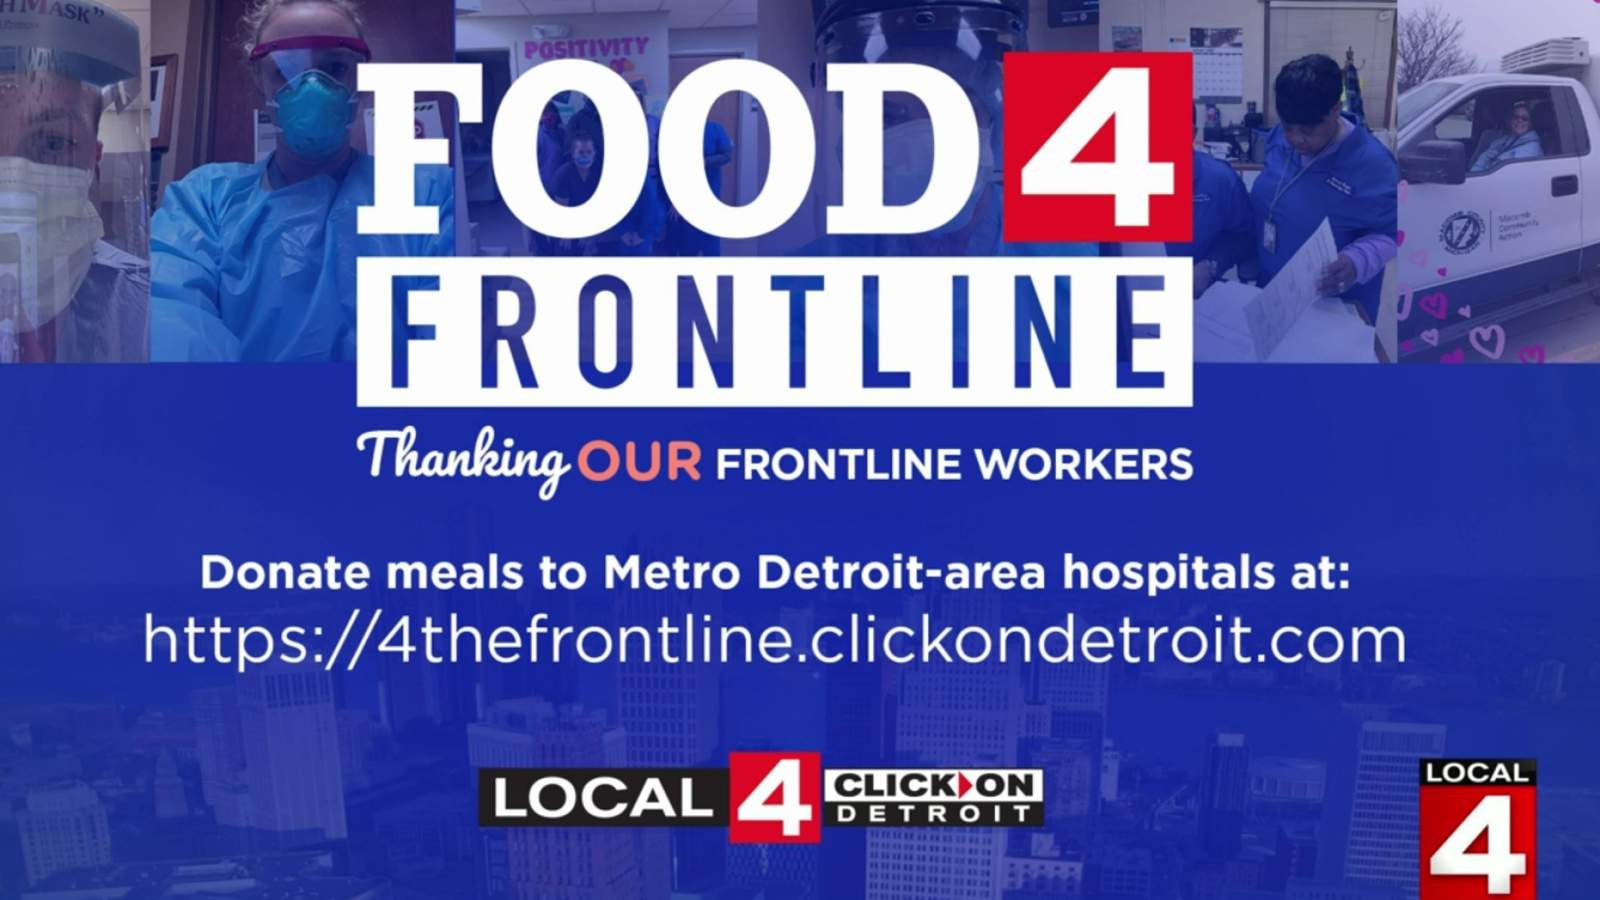 Food 4 Frontline: More than $100,000 raised for meals